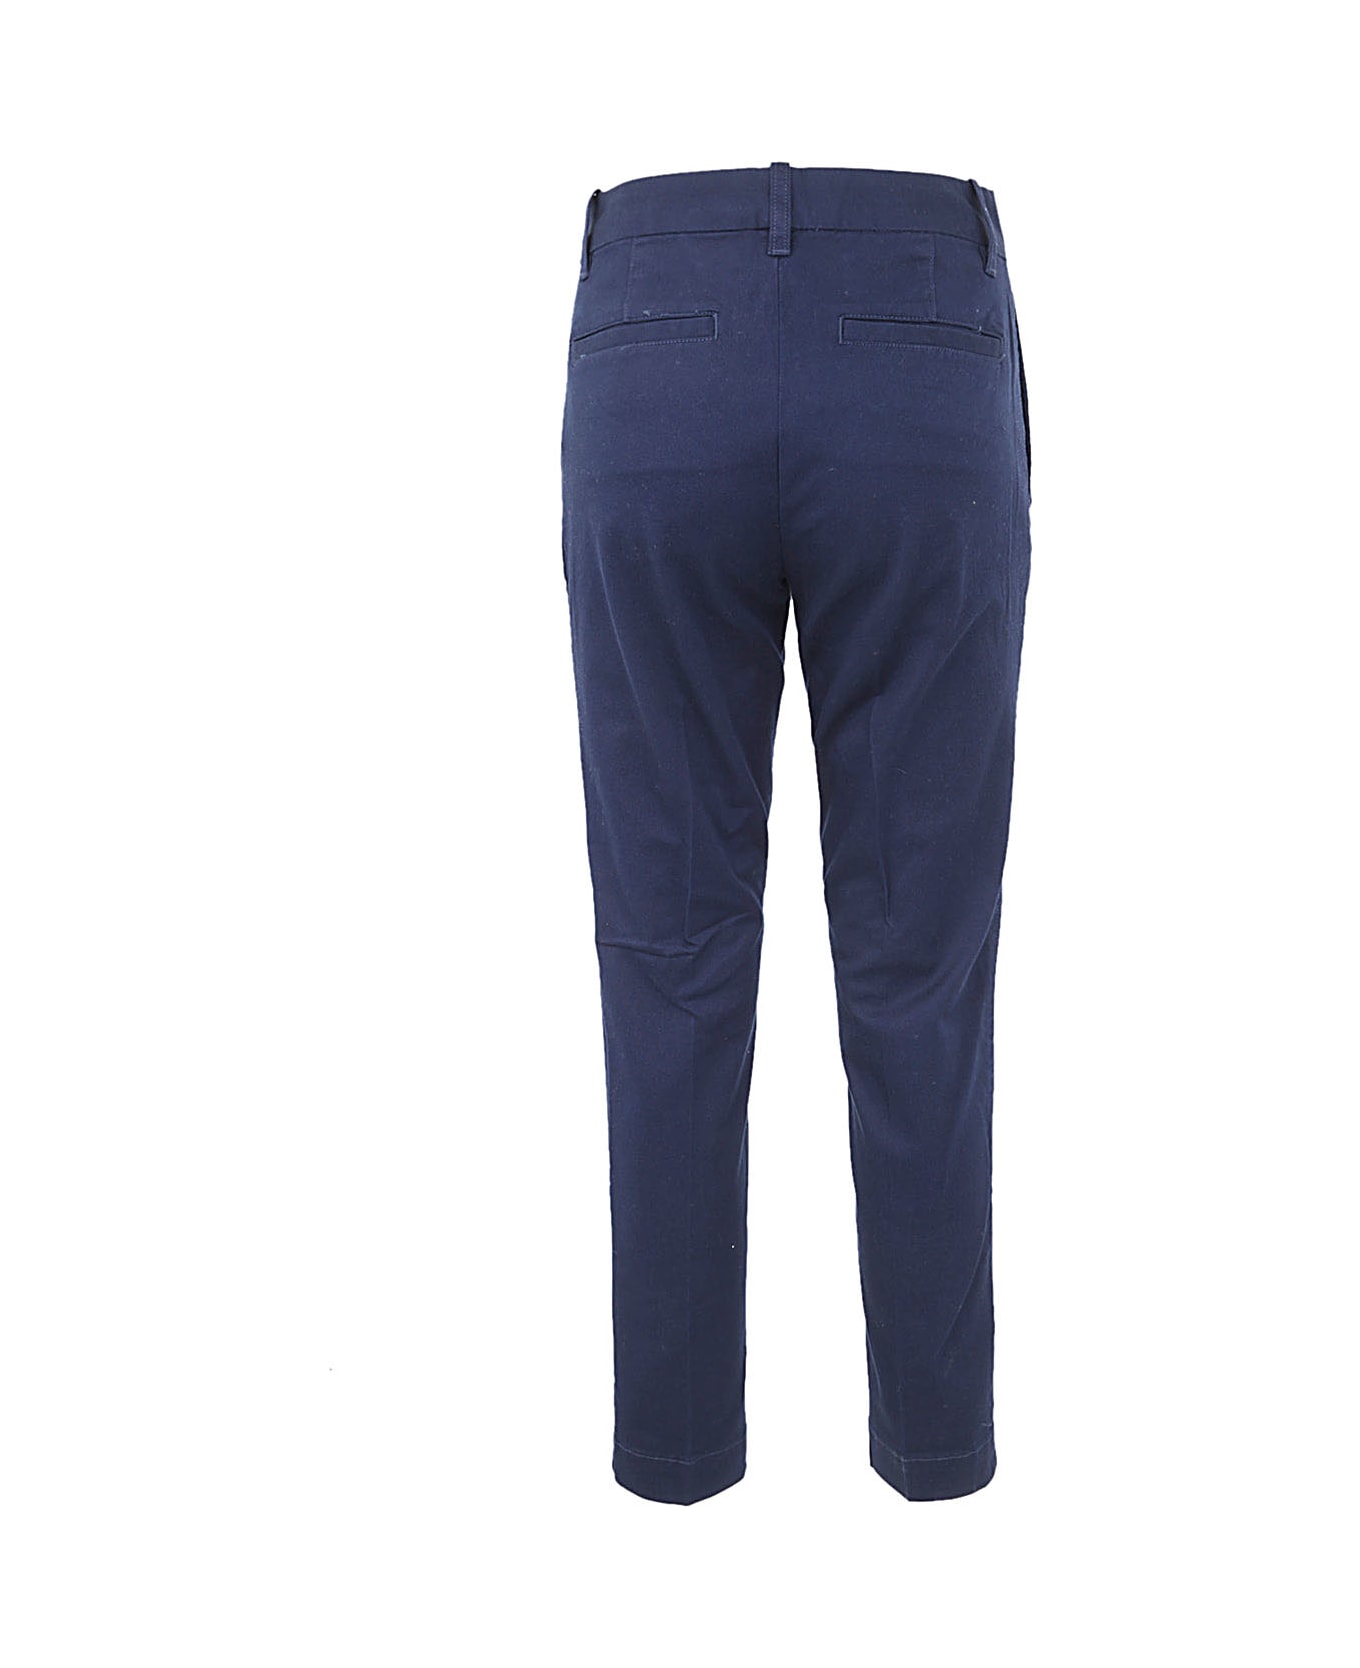 Polo Ralph Lauren Ankle Slim Chino Trouser With Flat Front - Newport Navy